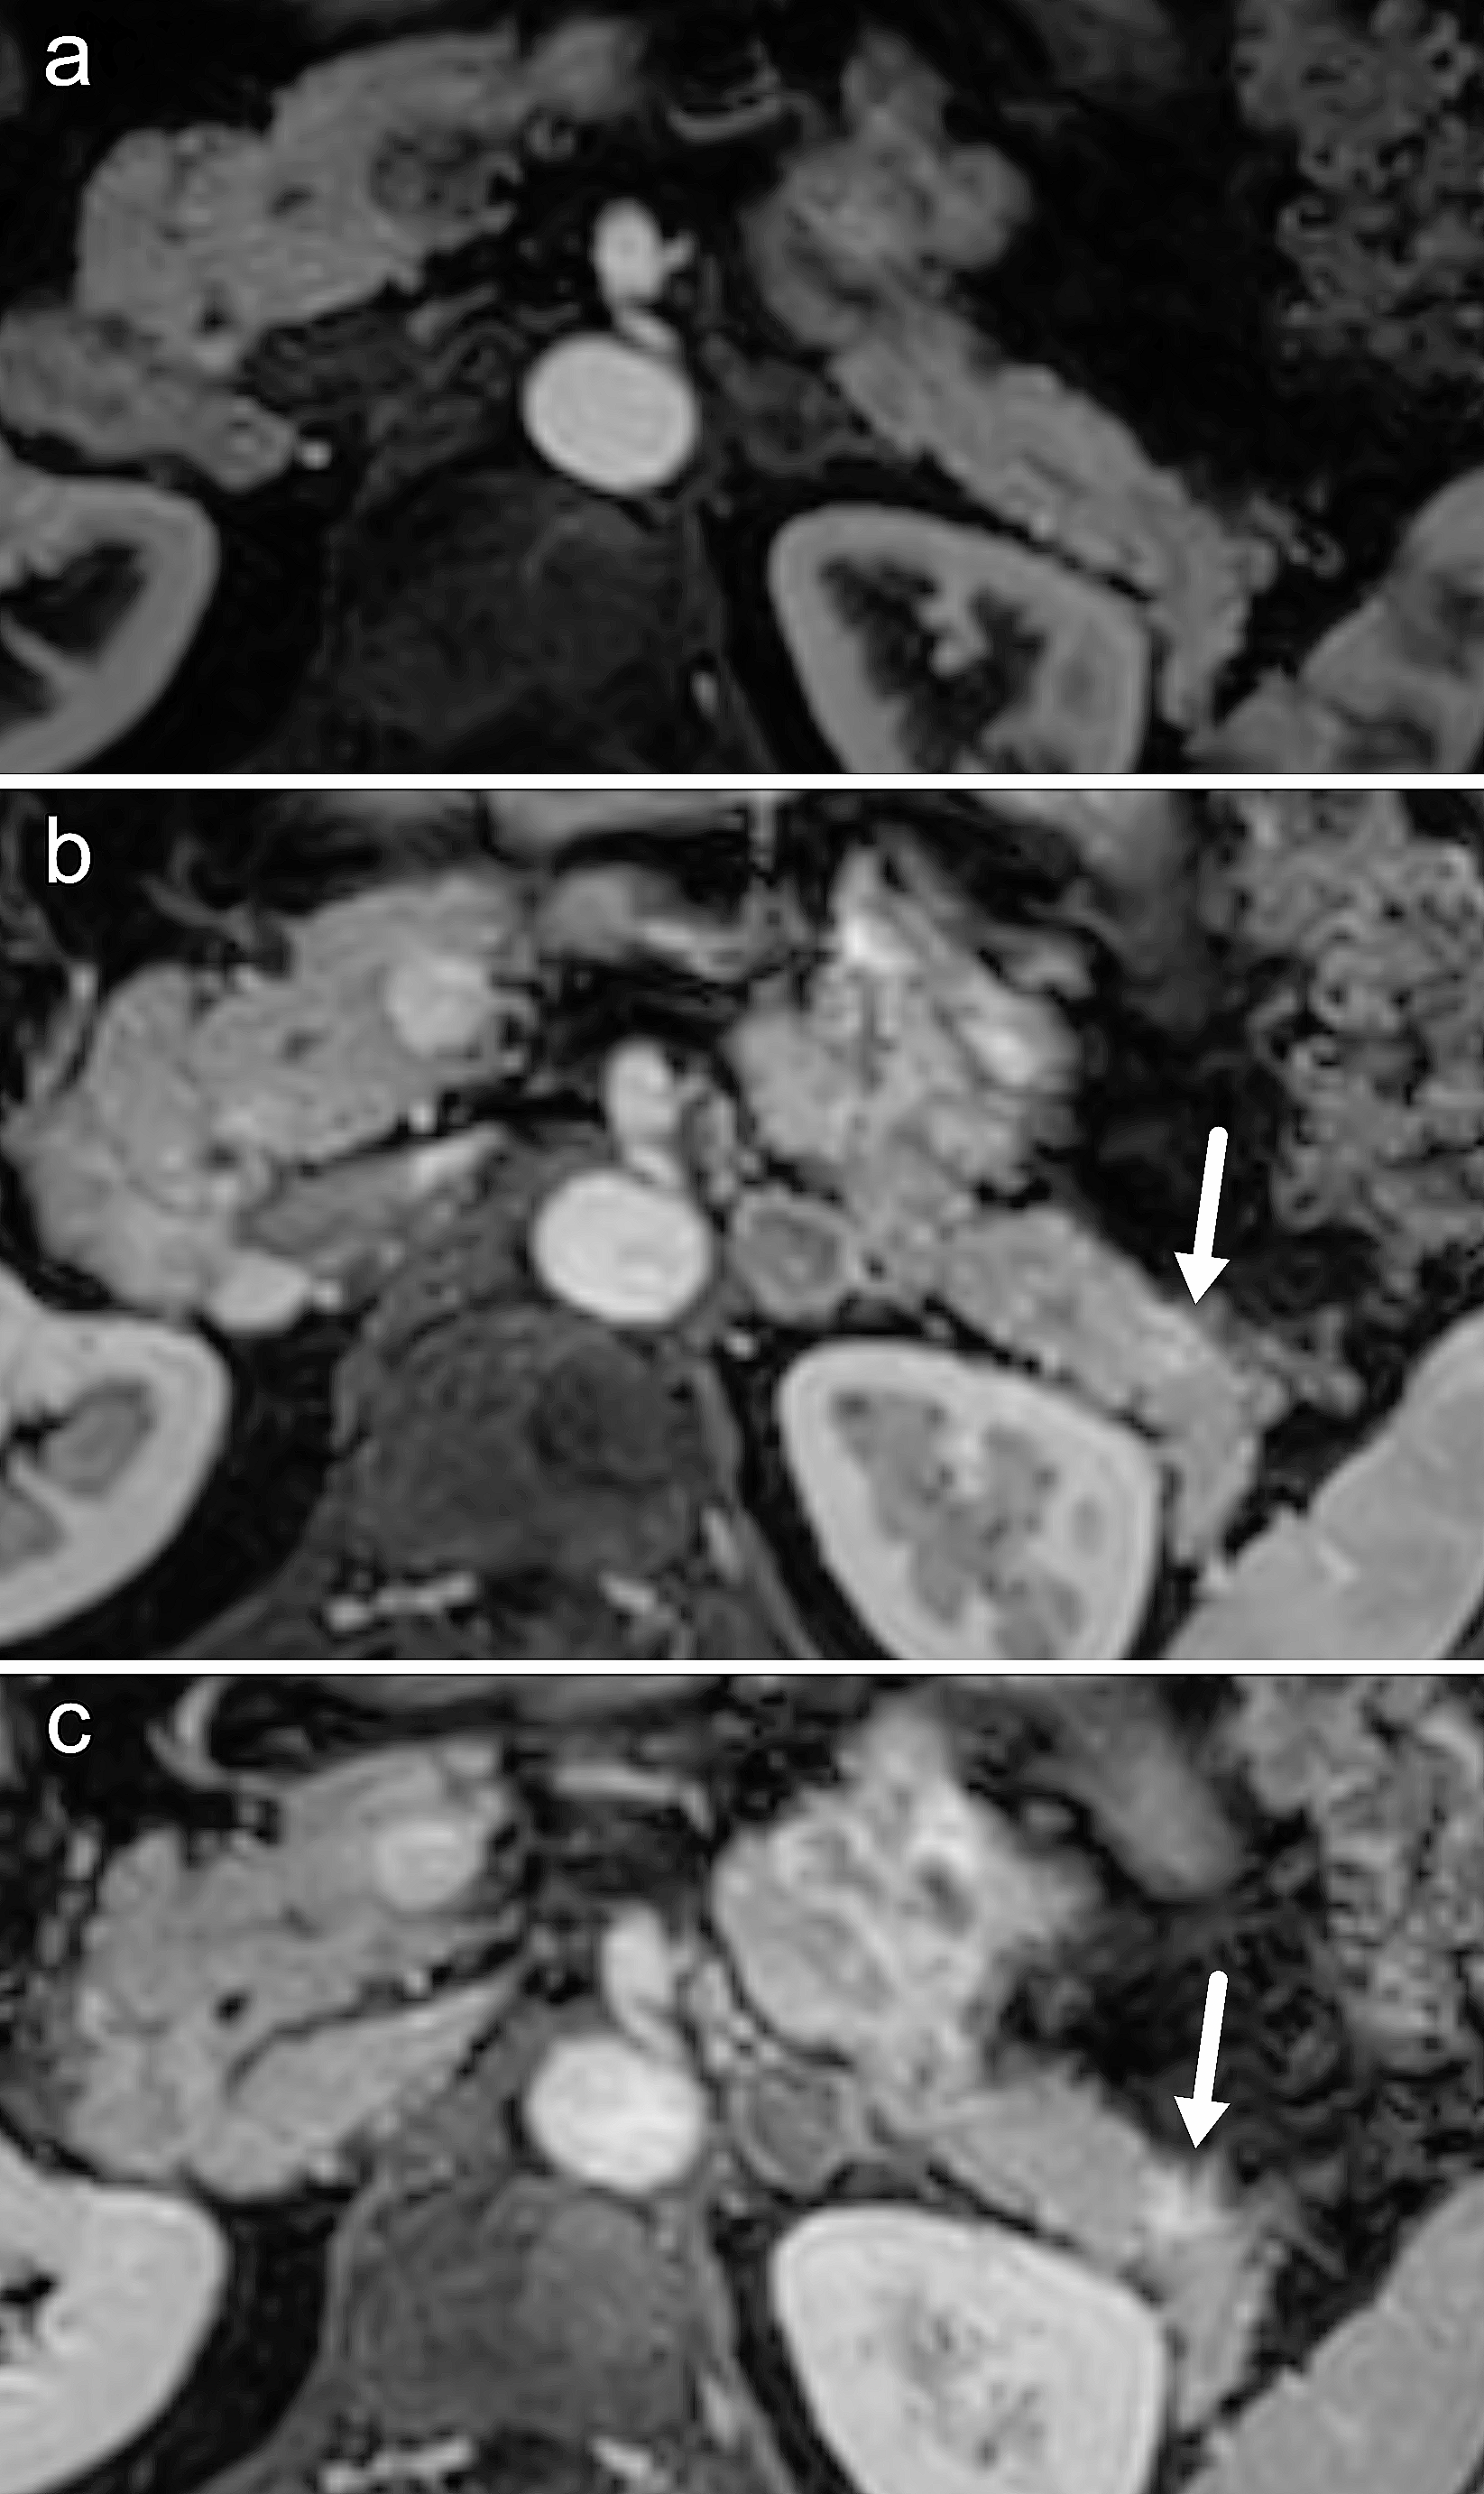 Screening for pancreatic cancer in high-risk individuals using MRI: optimization of scan techniques to detect small lesions